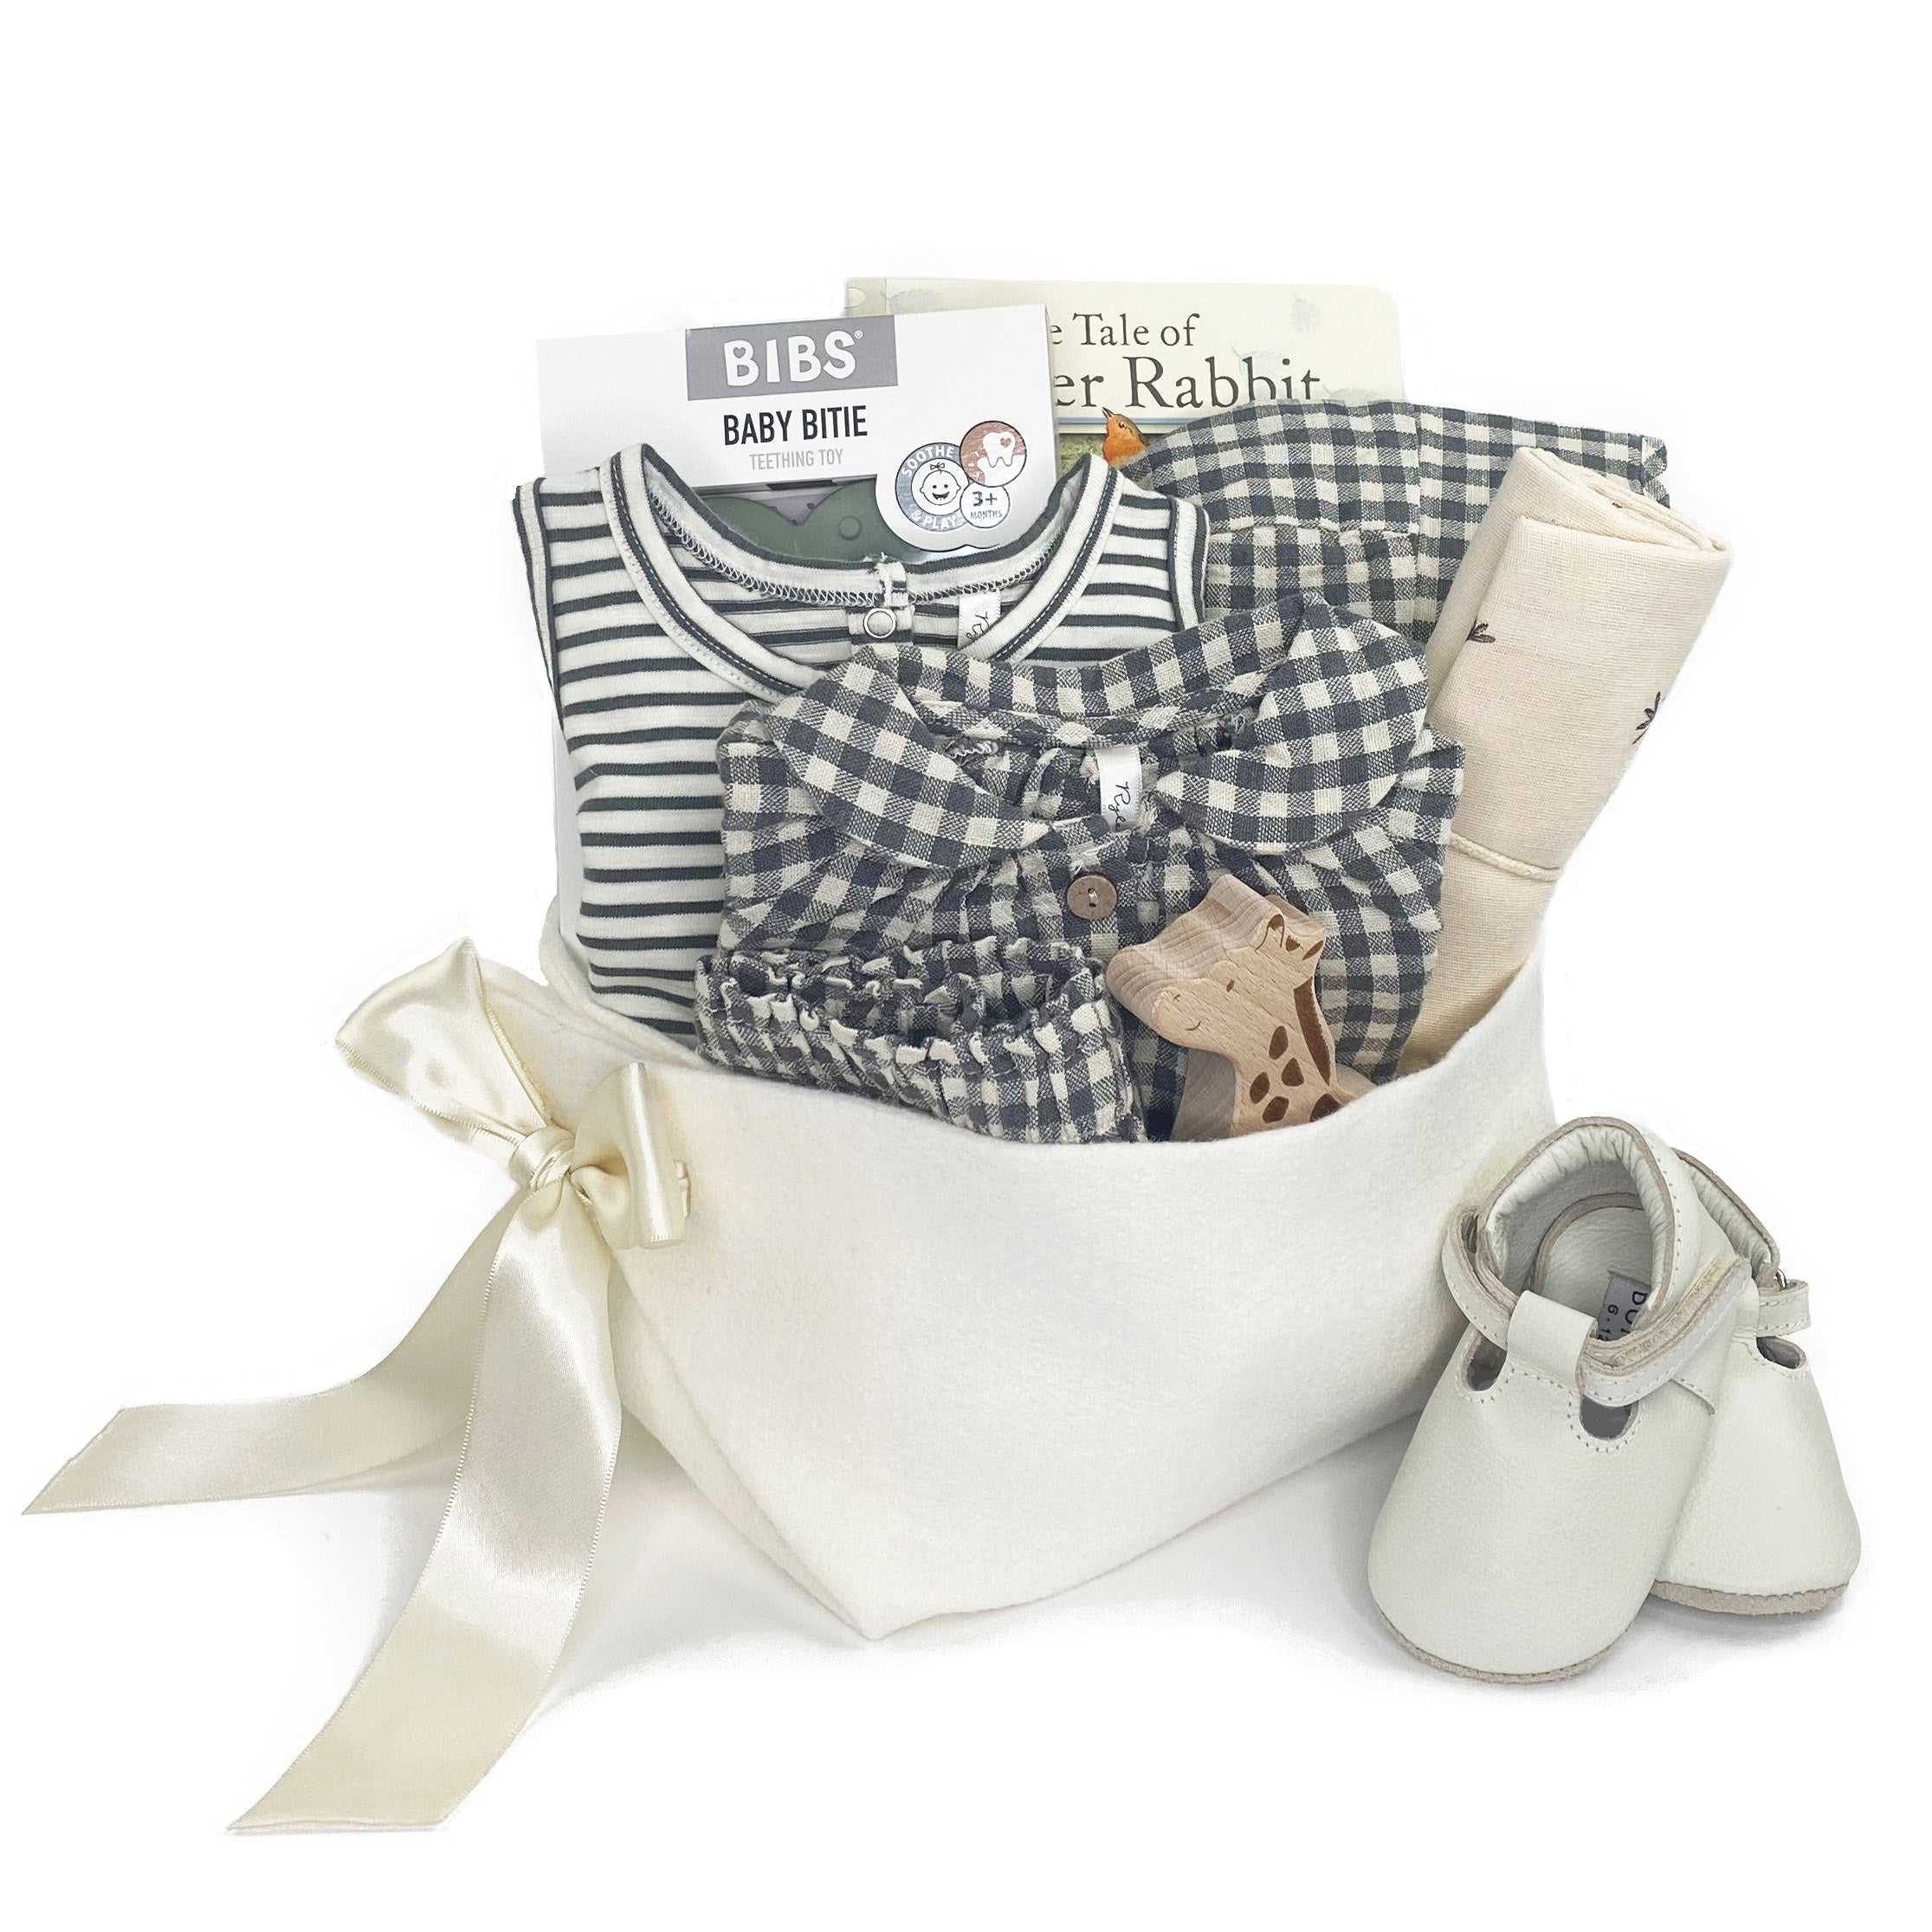 Luxury Baby Girl Gift Basket at Bonjour Baby Baskets  featuring Rylee and Cru and curated baby gifts